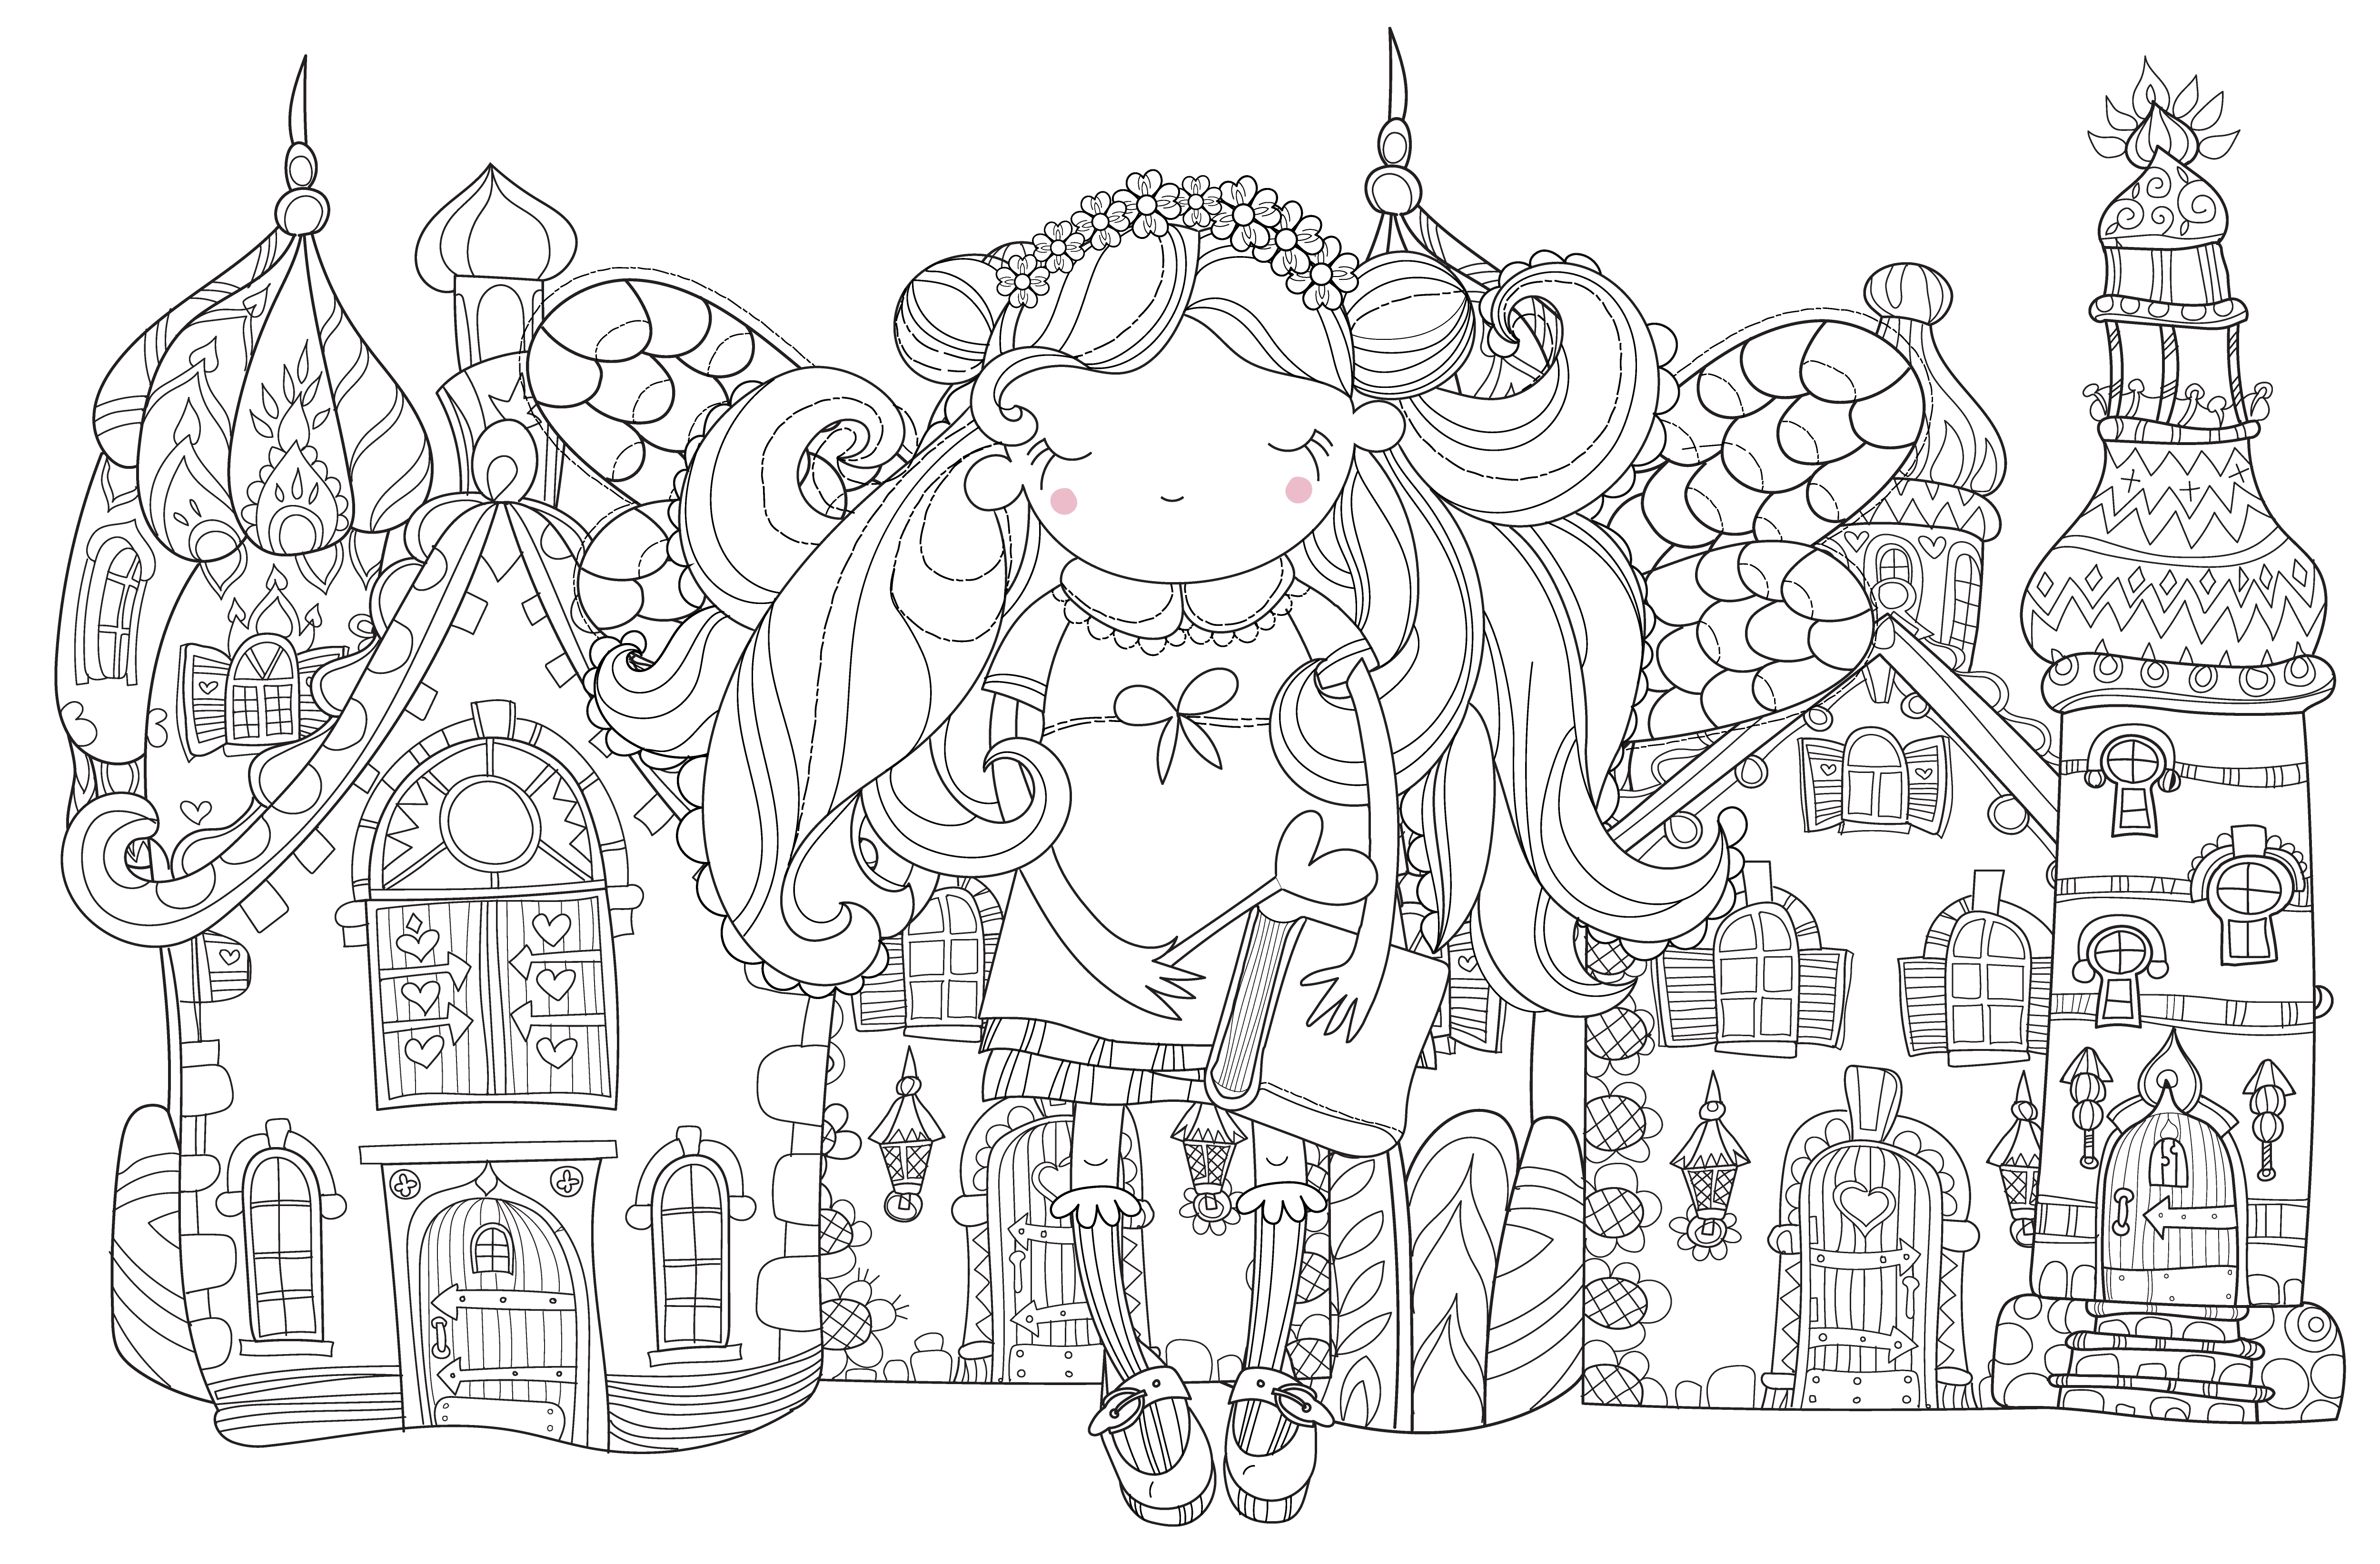 Coloring For Cute Princess , HD Wallpaper & Backgrounds